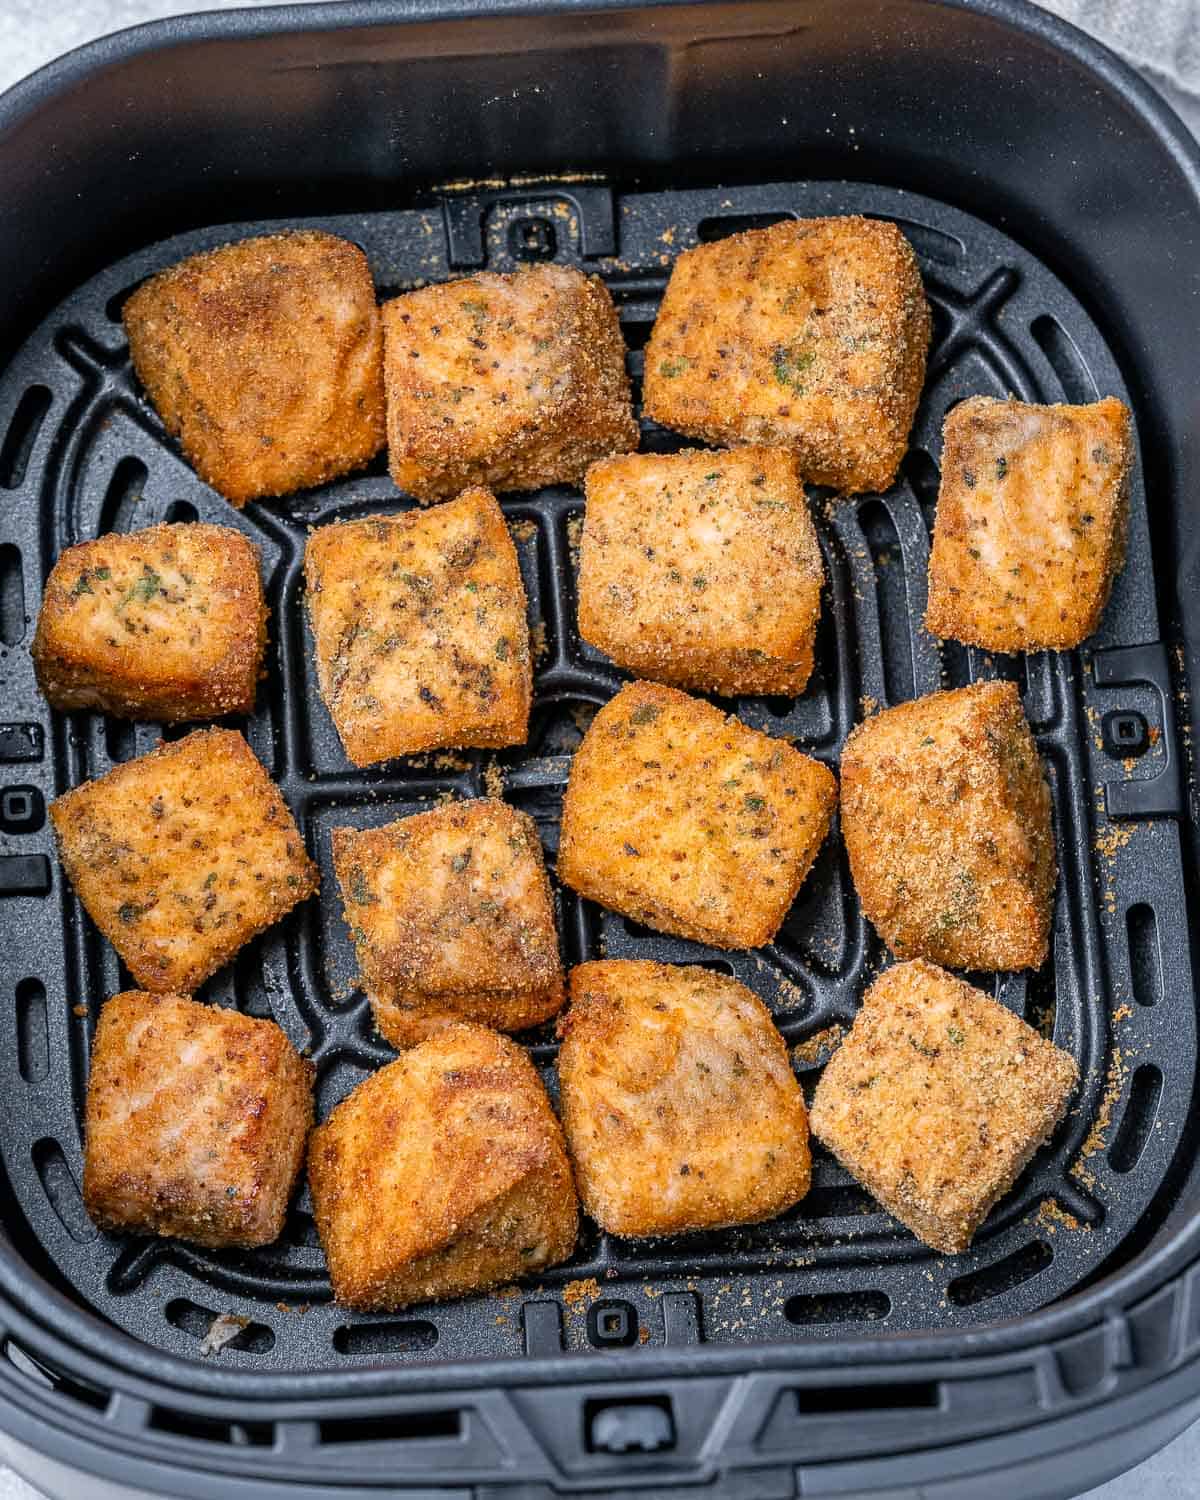 Salmon cooking in an air fryer.